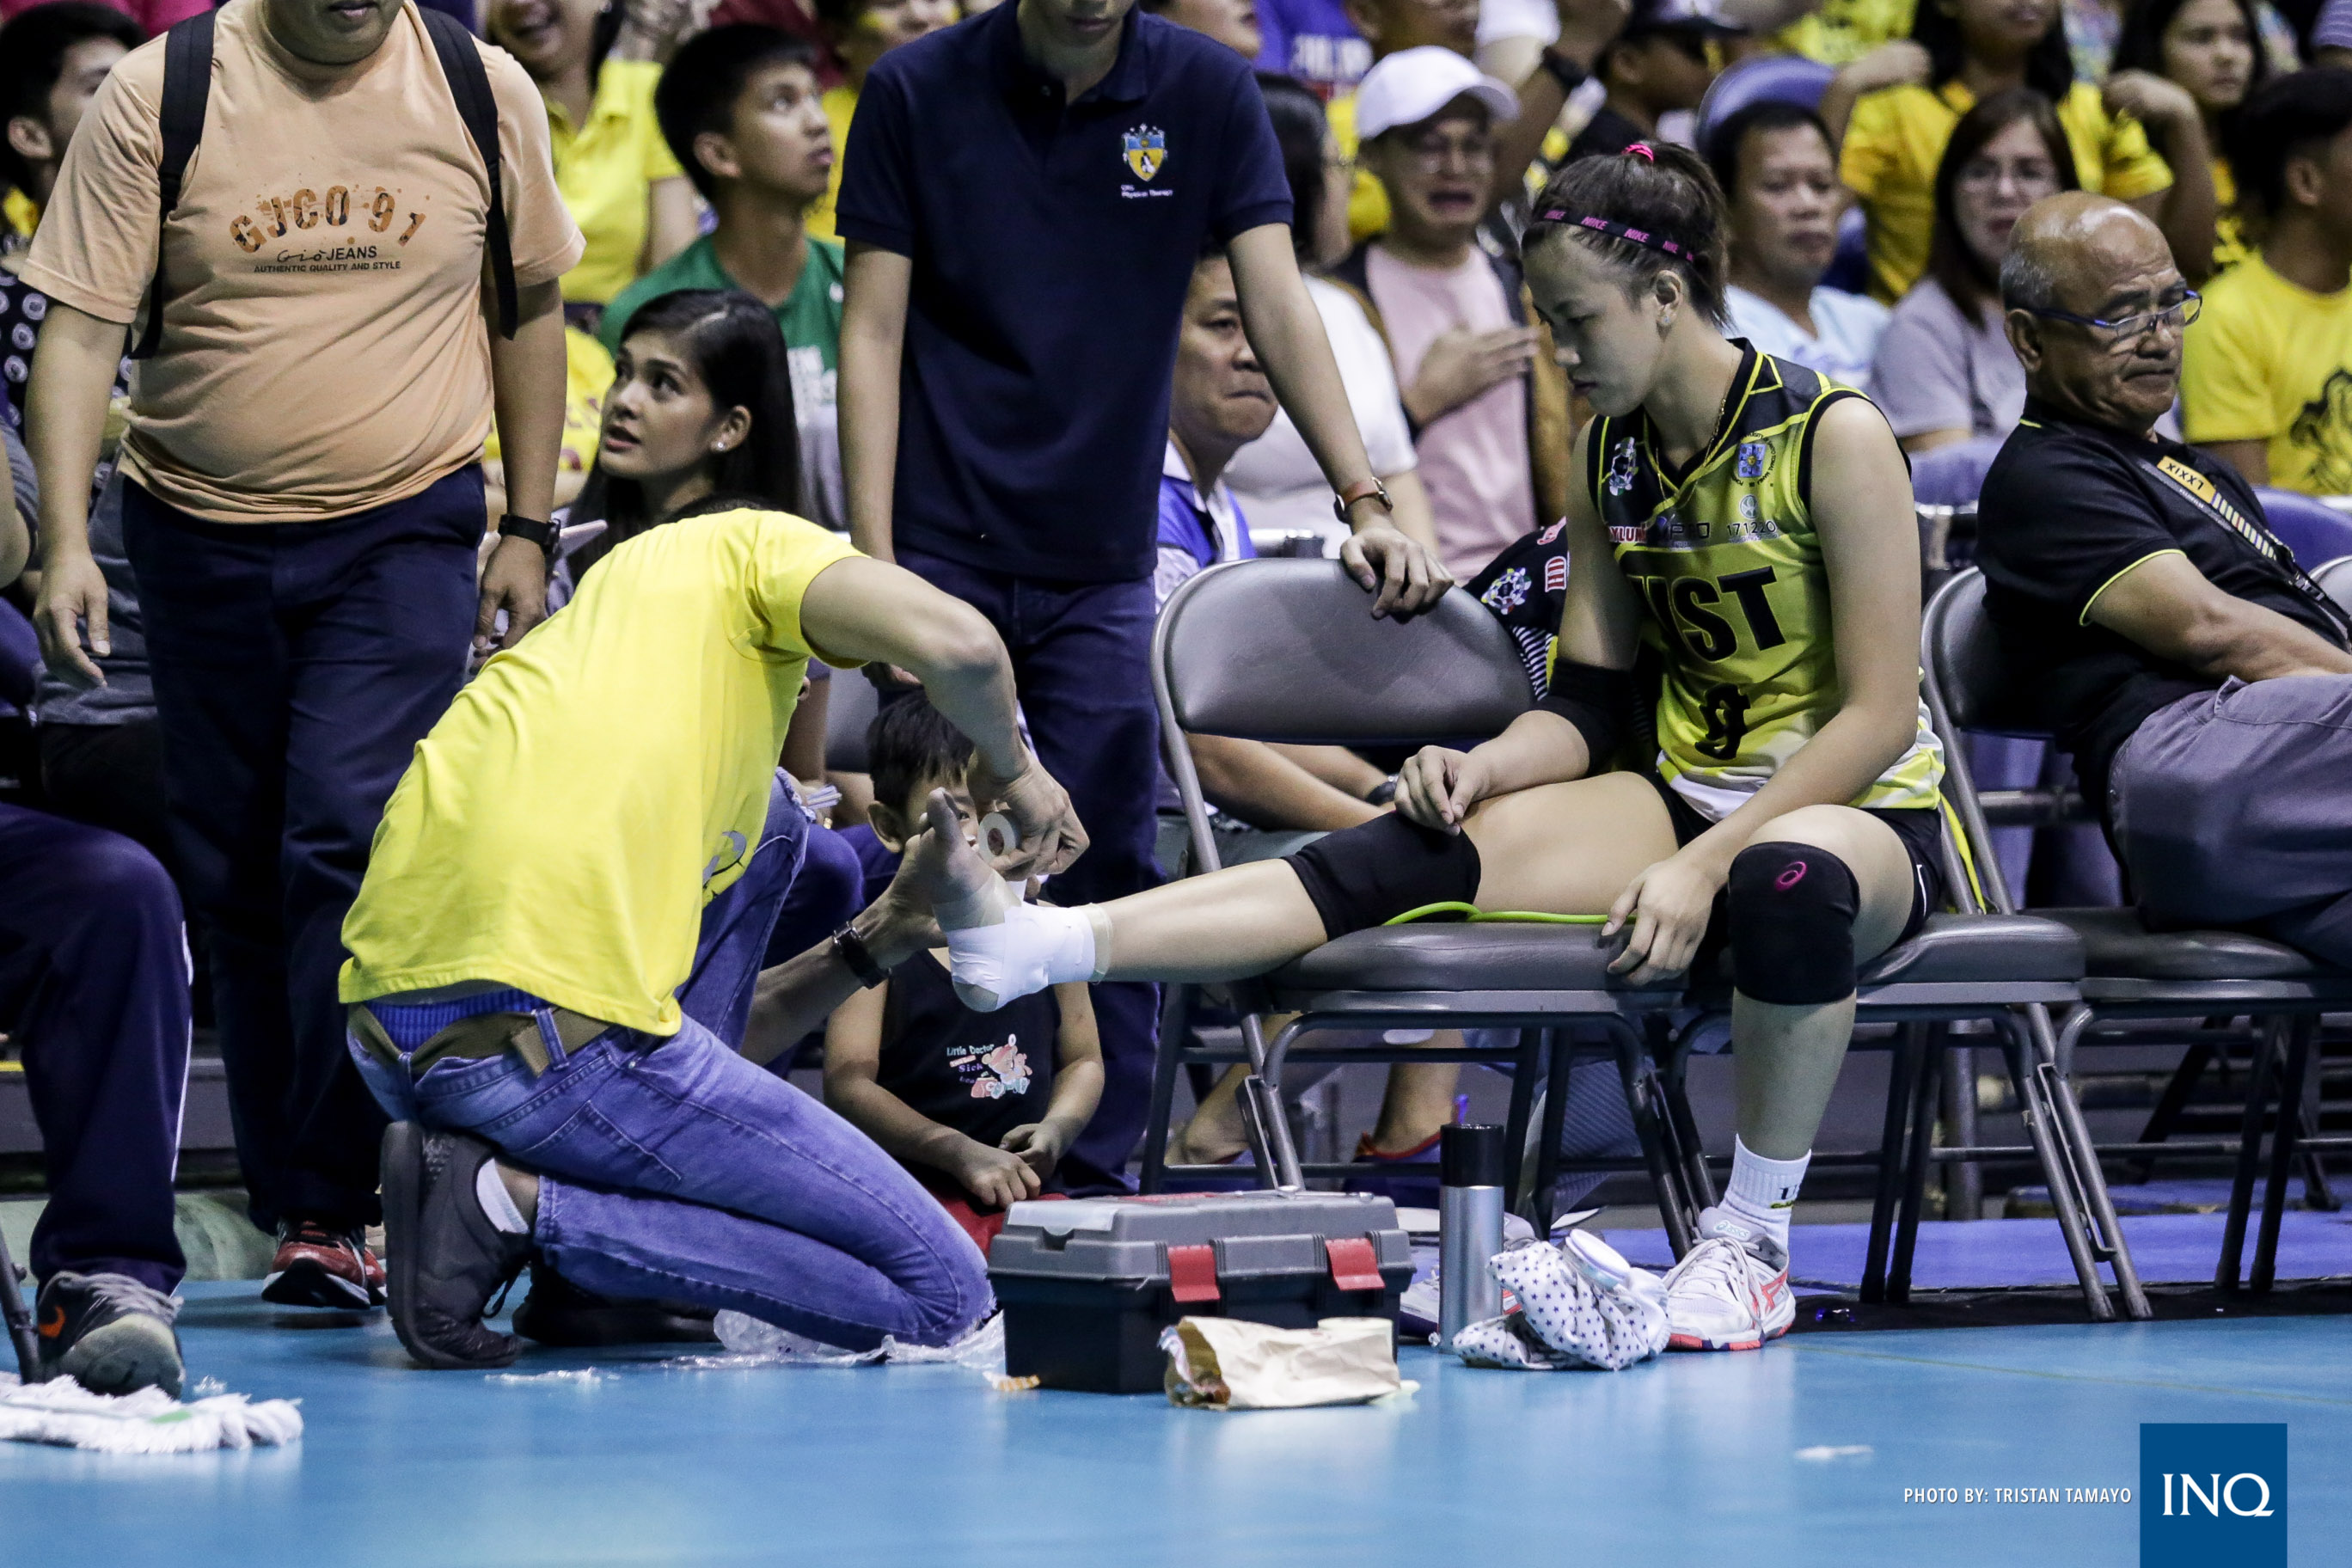 EJ Laure gets her injured ankle taped by father Eddie, a former PBA player. Photo by Tristan Tamayo/INQUIRER.net